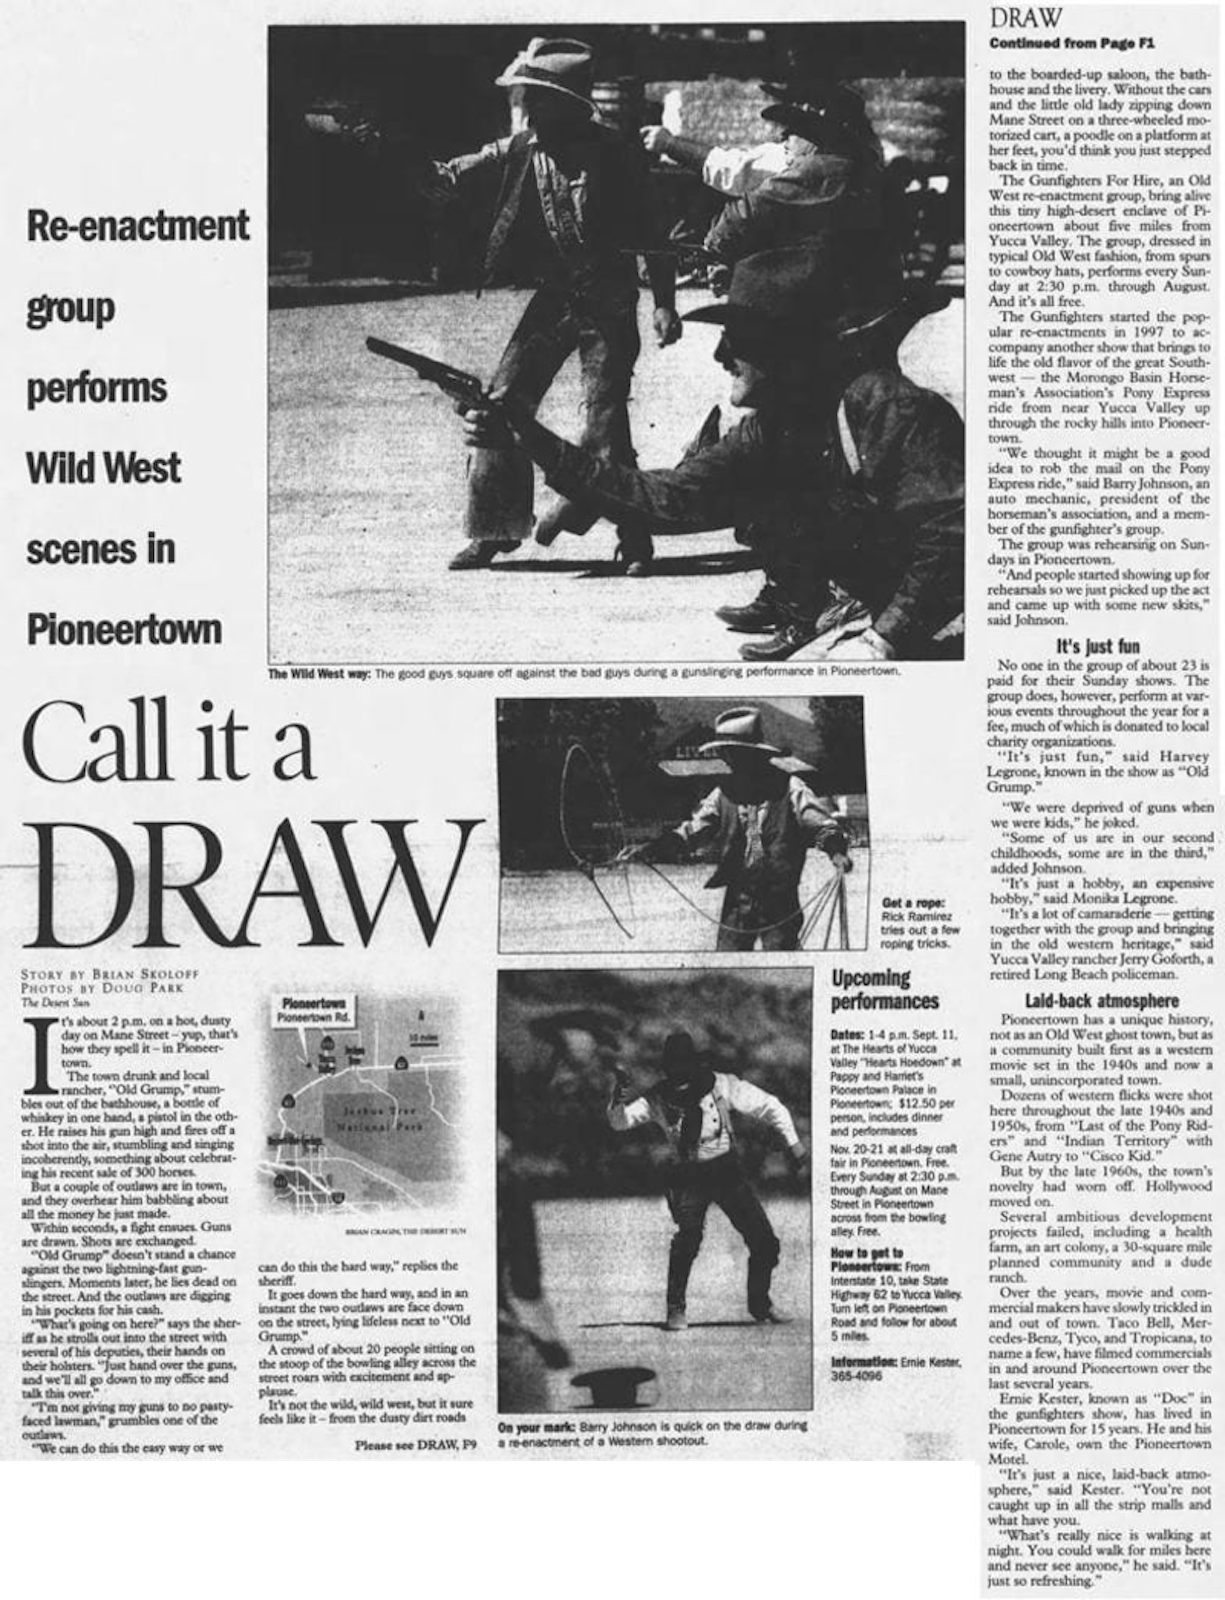 Aug. 8, 1999 - The Desert Sun article clipping